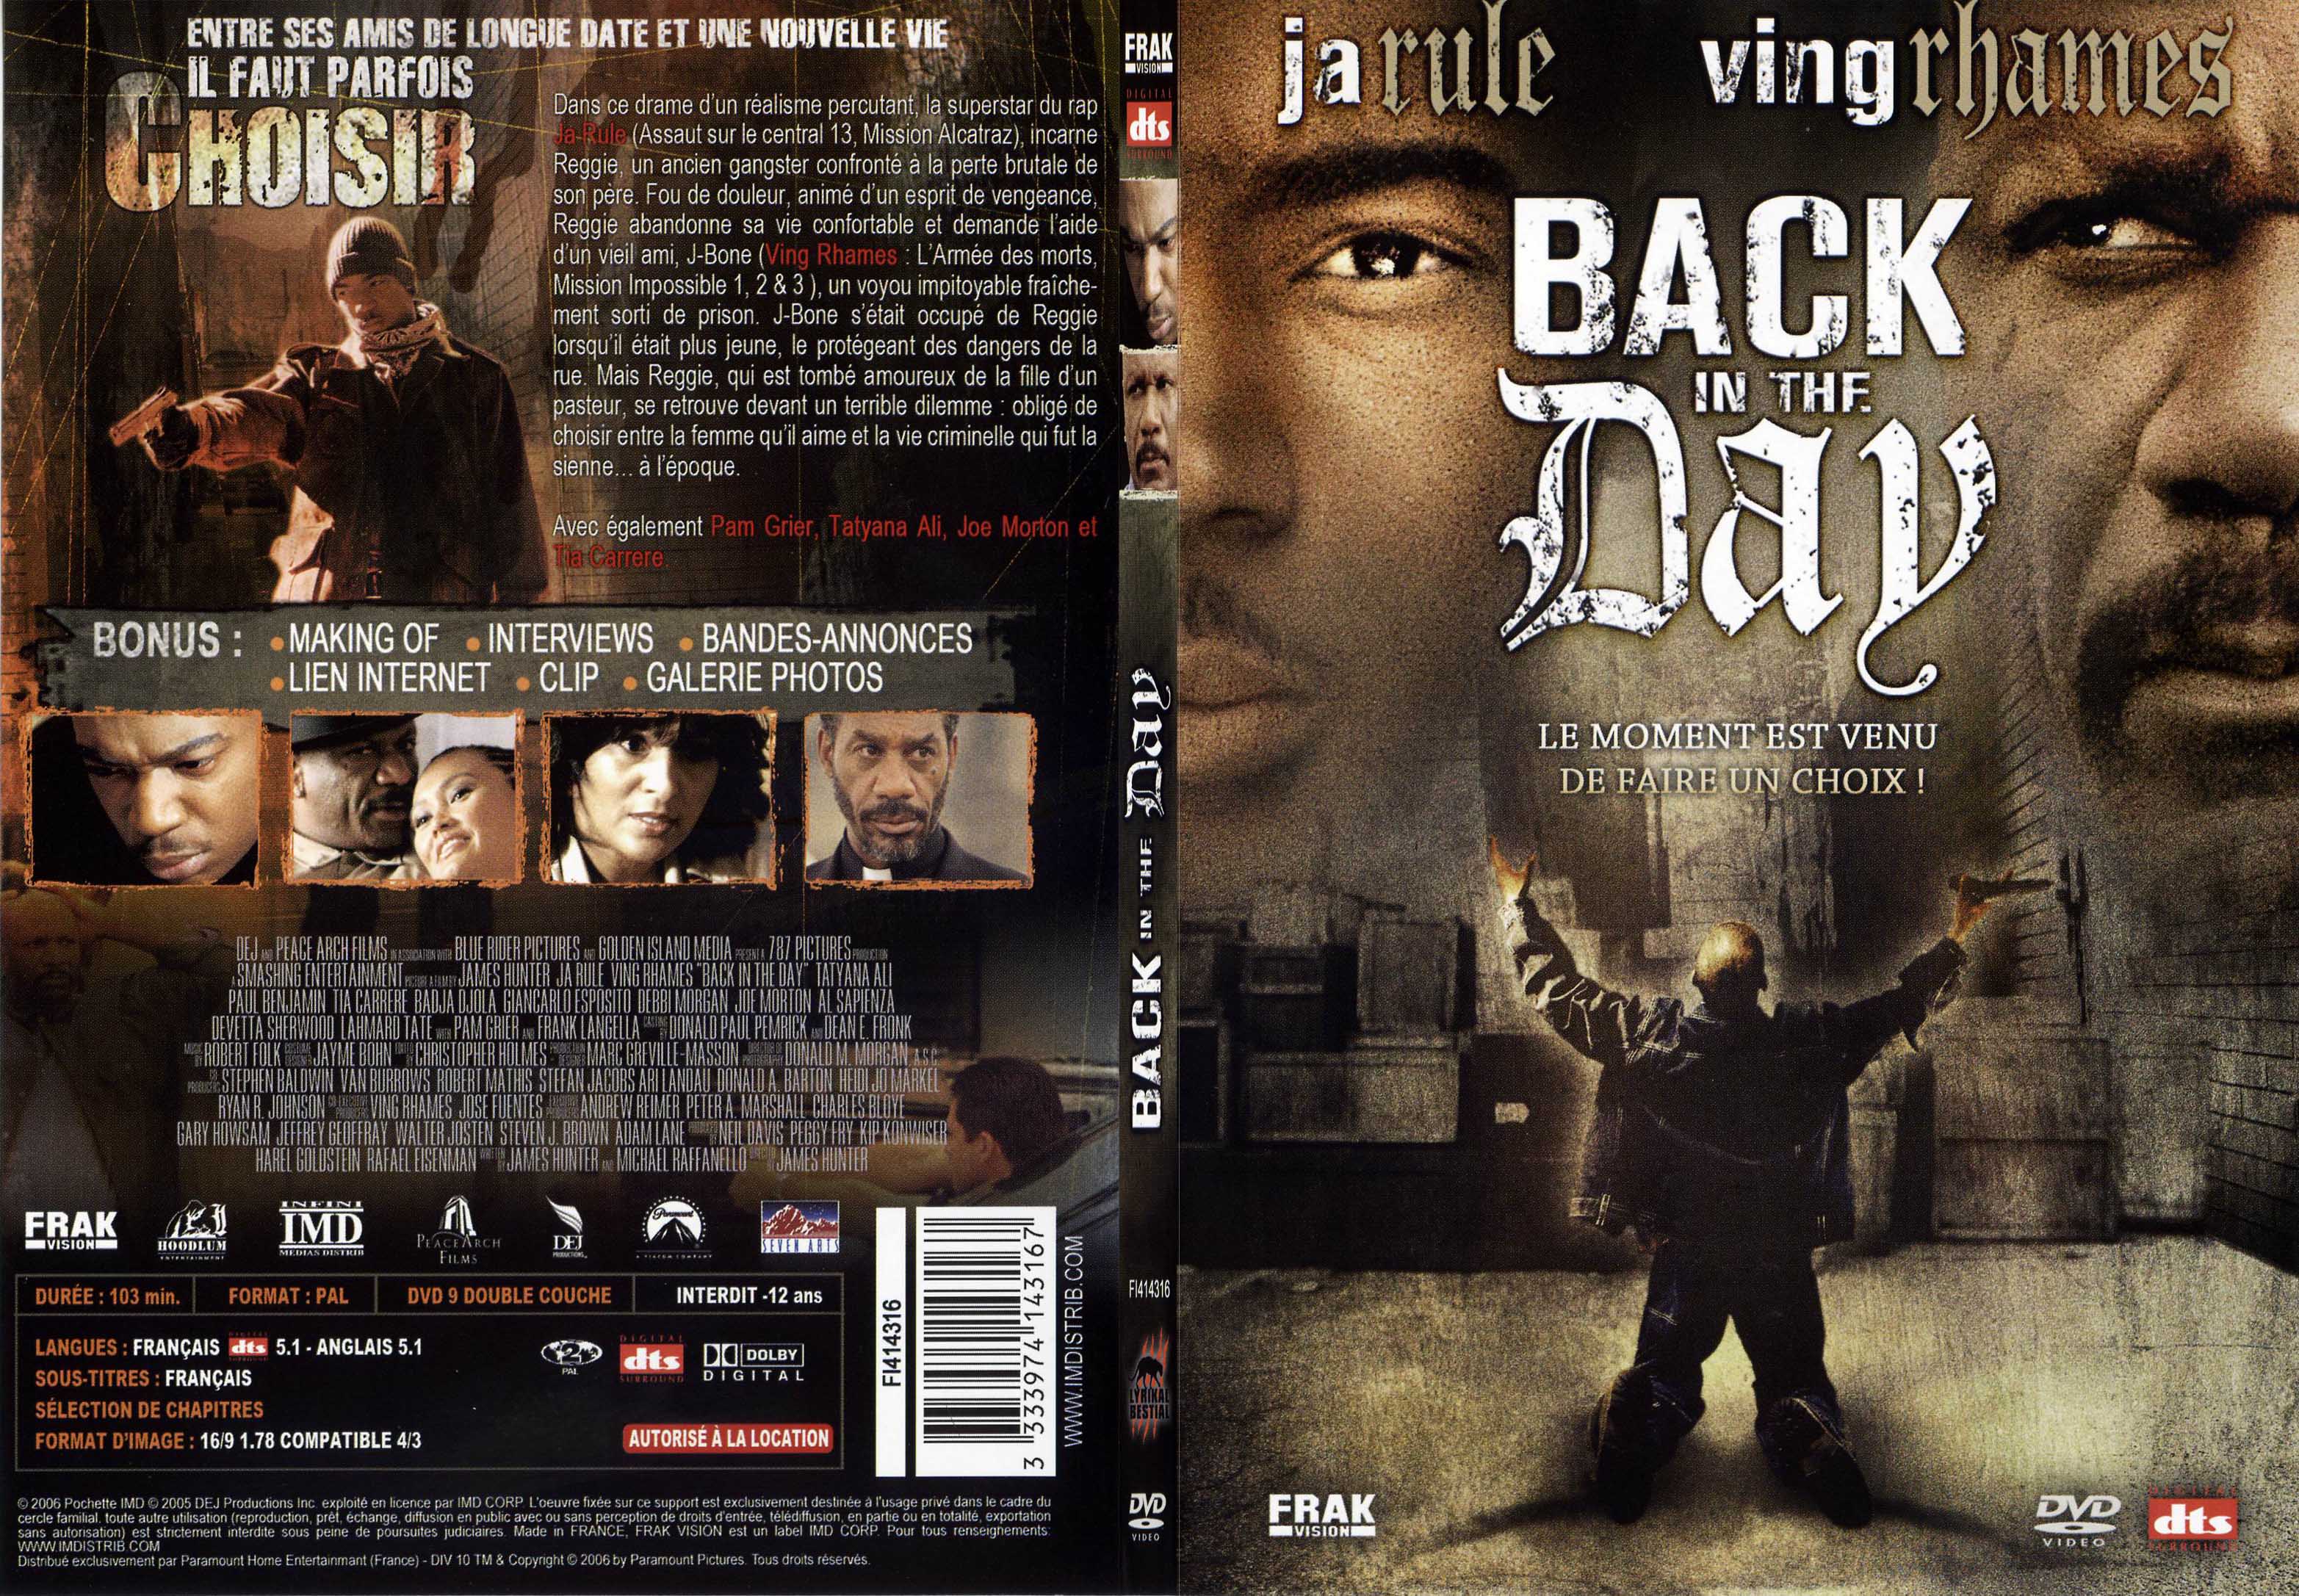 Jaquette DVD Back in the day - SLIM